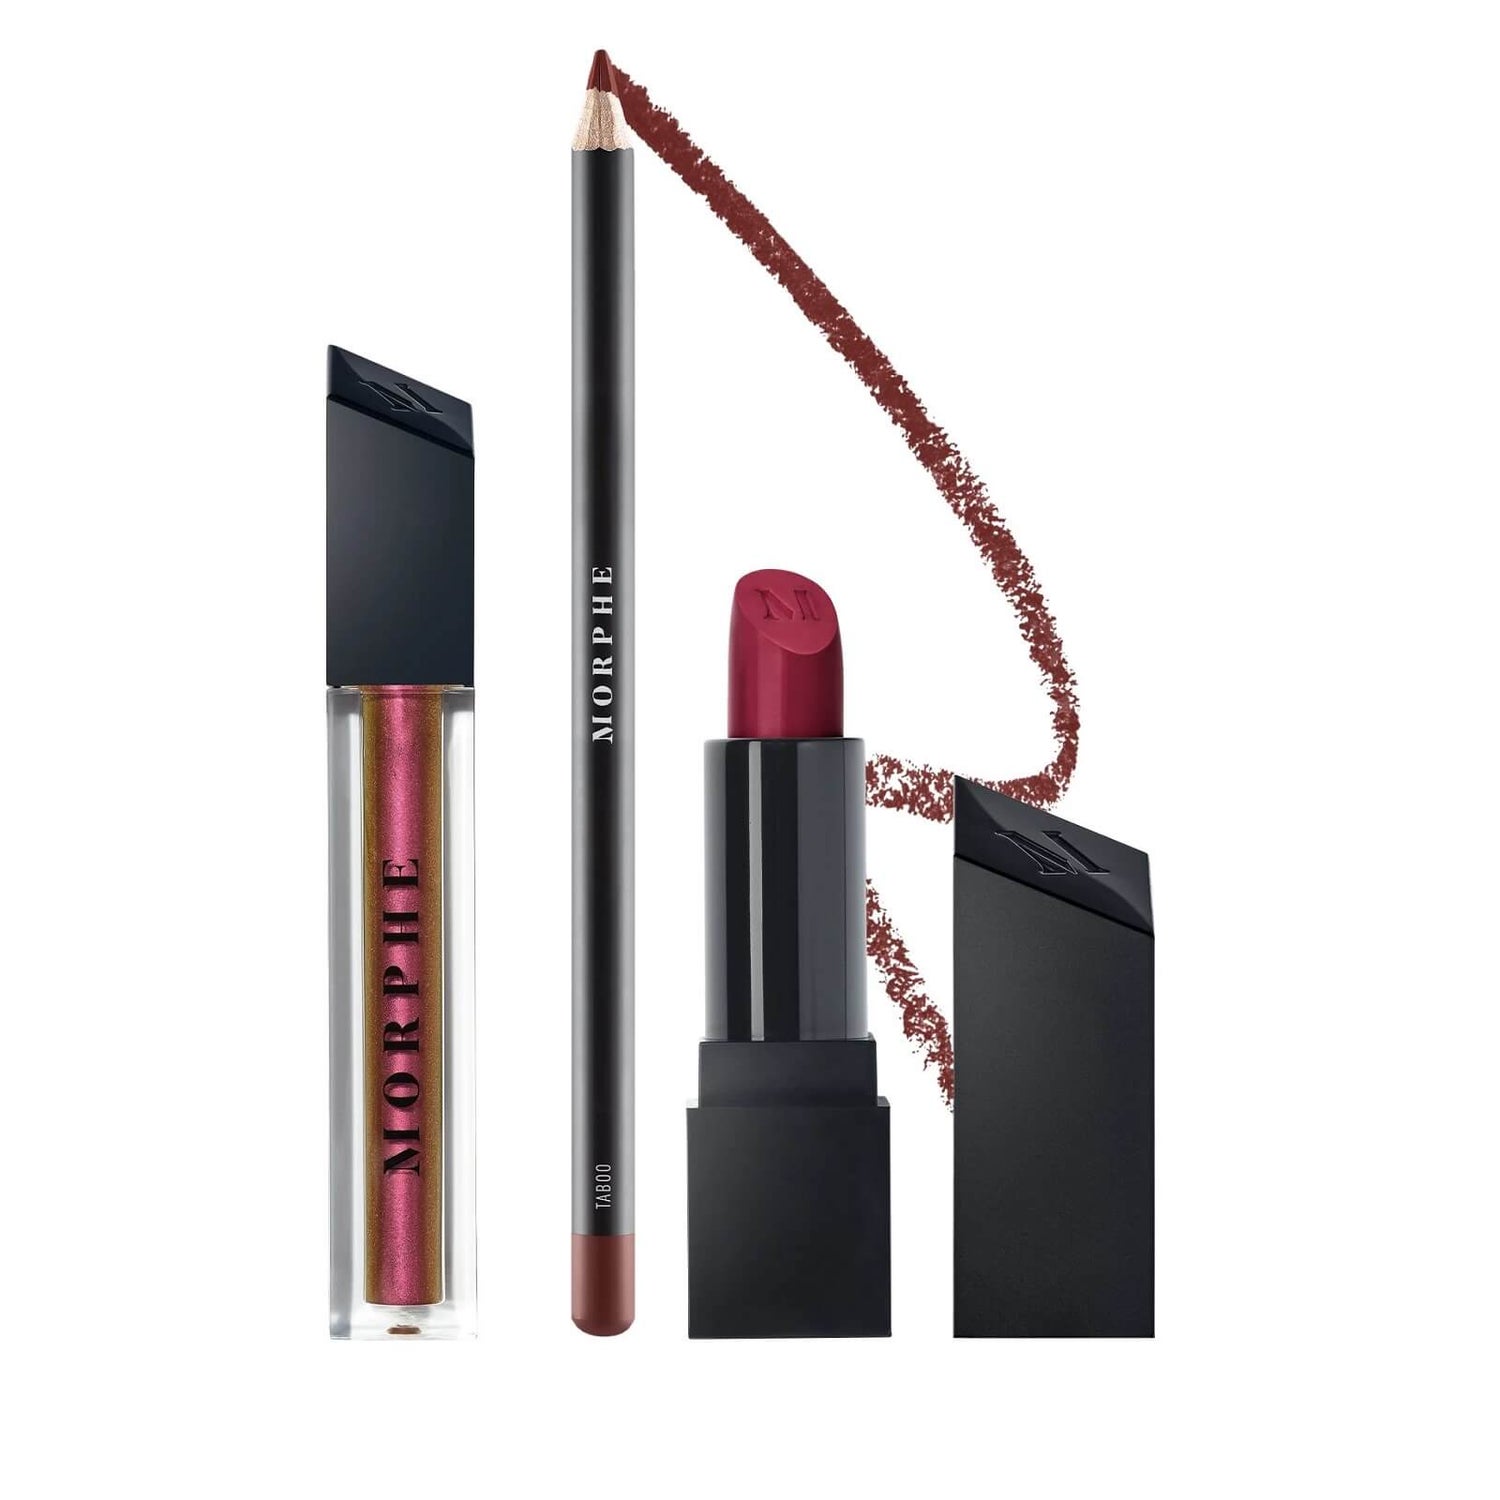 Morphe Out and A Pout Lip Trio - Smoky Red (Worth £26.50)